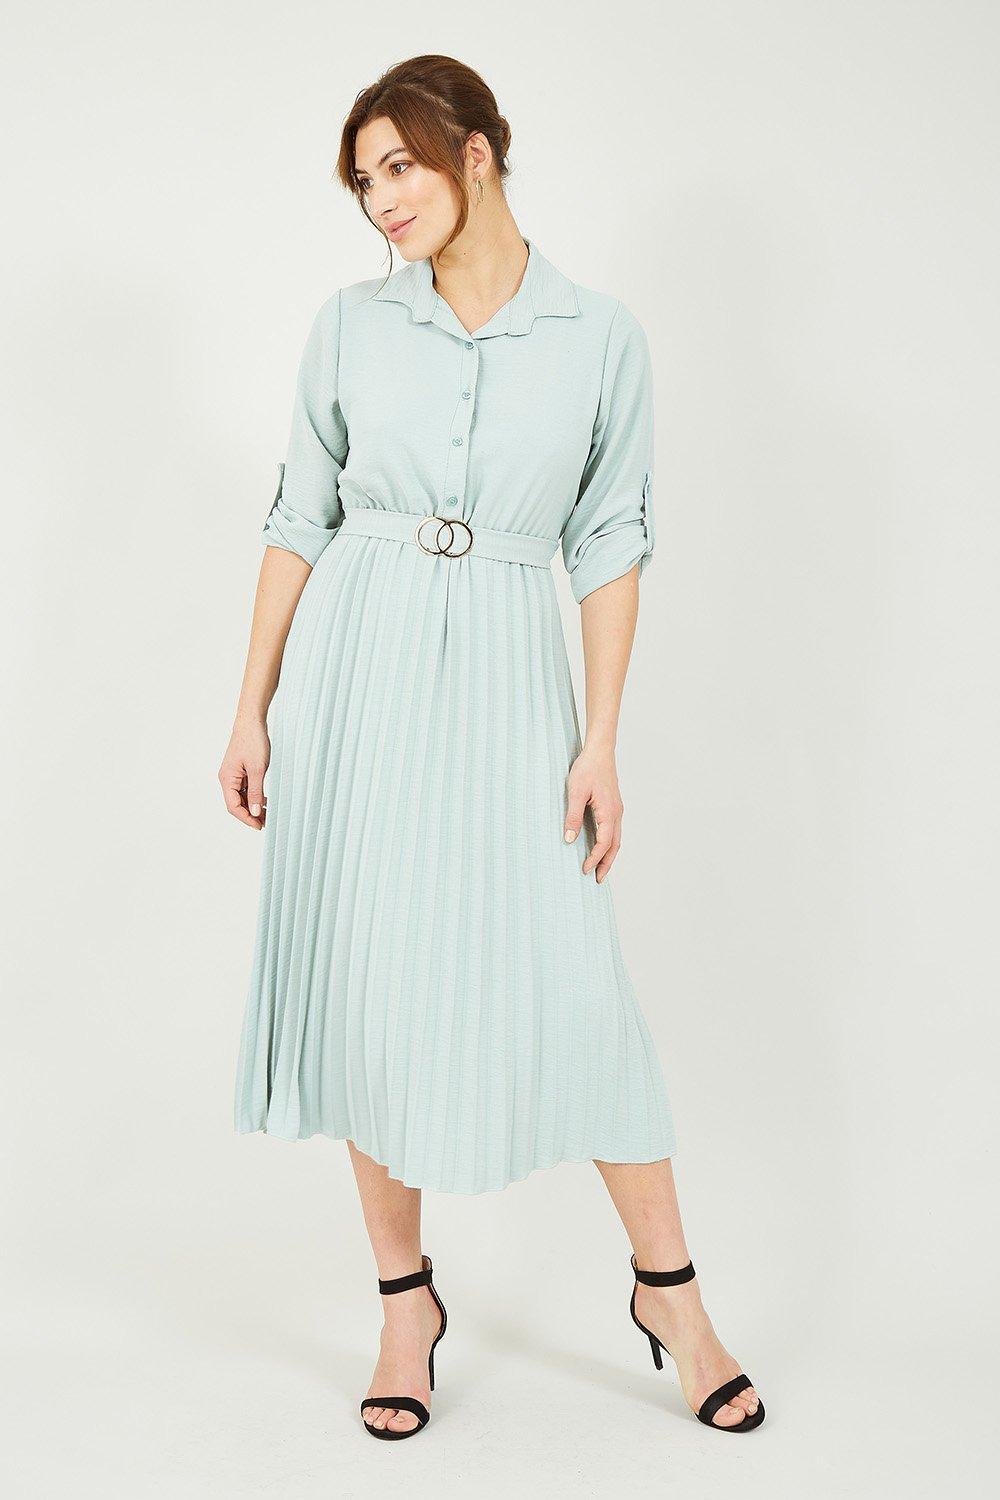 Sage Green Pleated Skirt Midi Dress With Gold Buckle